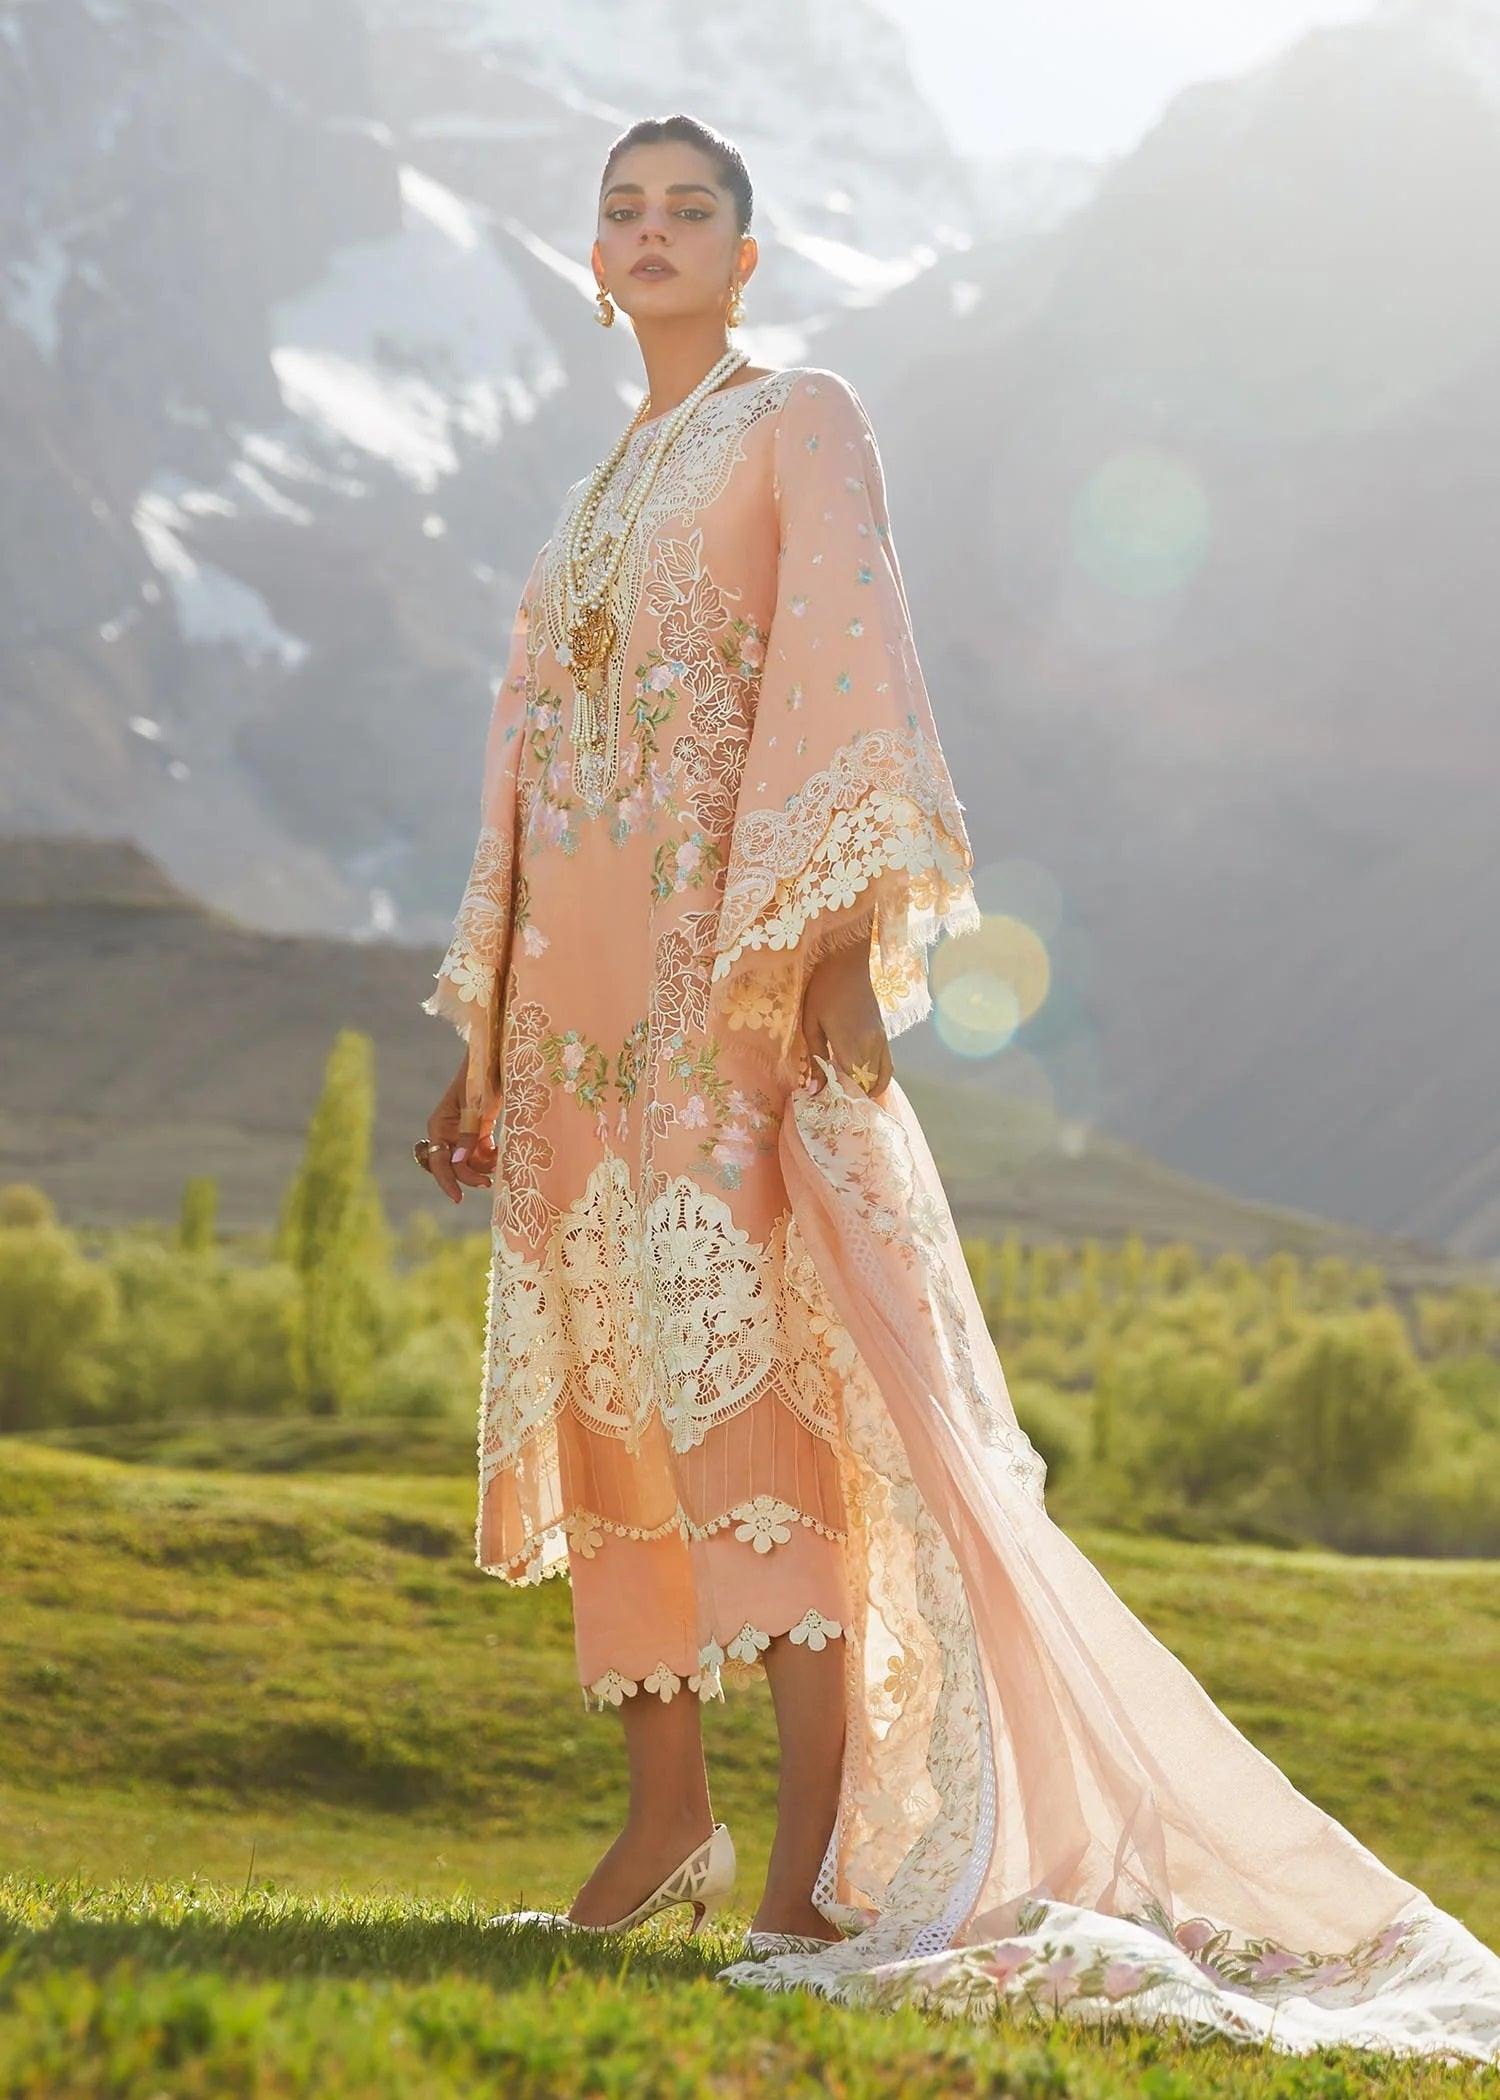 Crimson Embroidered Lawn Suits Unstitched 3 Piece 1B Dusty Pink Summer Collection